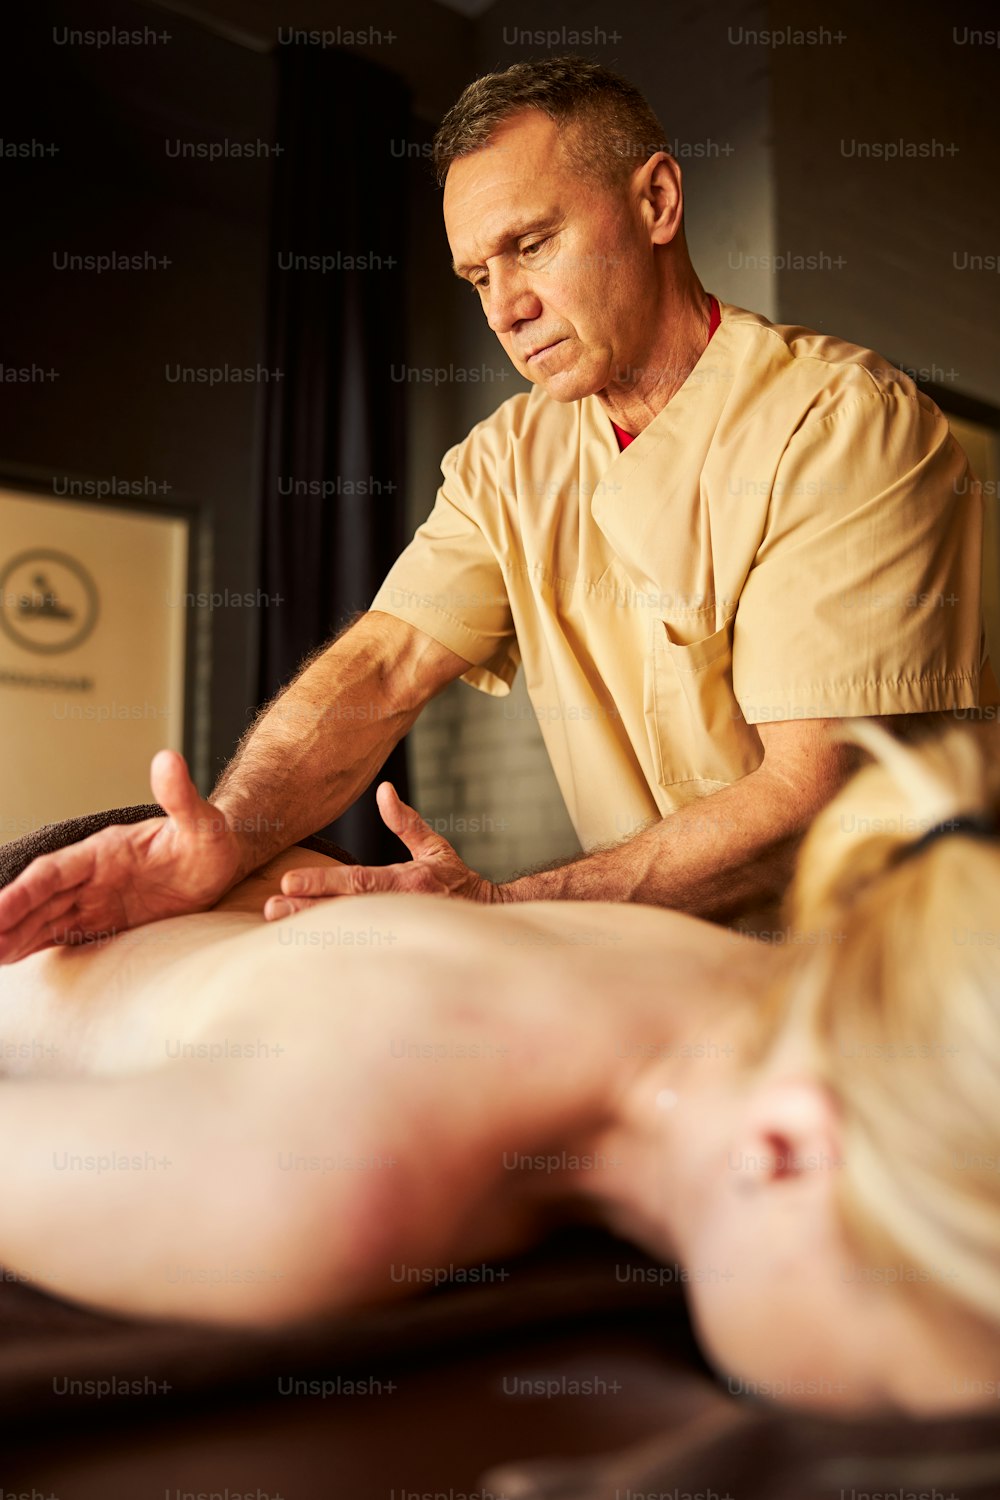 Focused spa worker looking concentrated while rubbing and pressing on person bare back